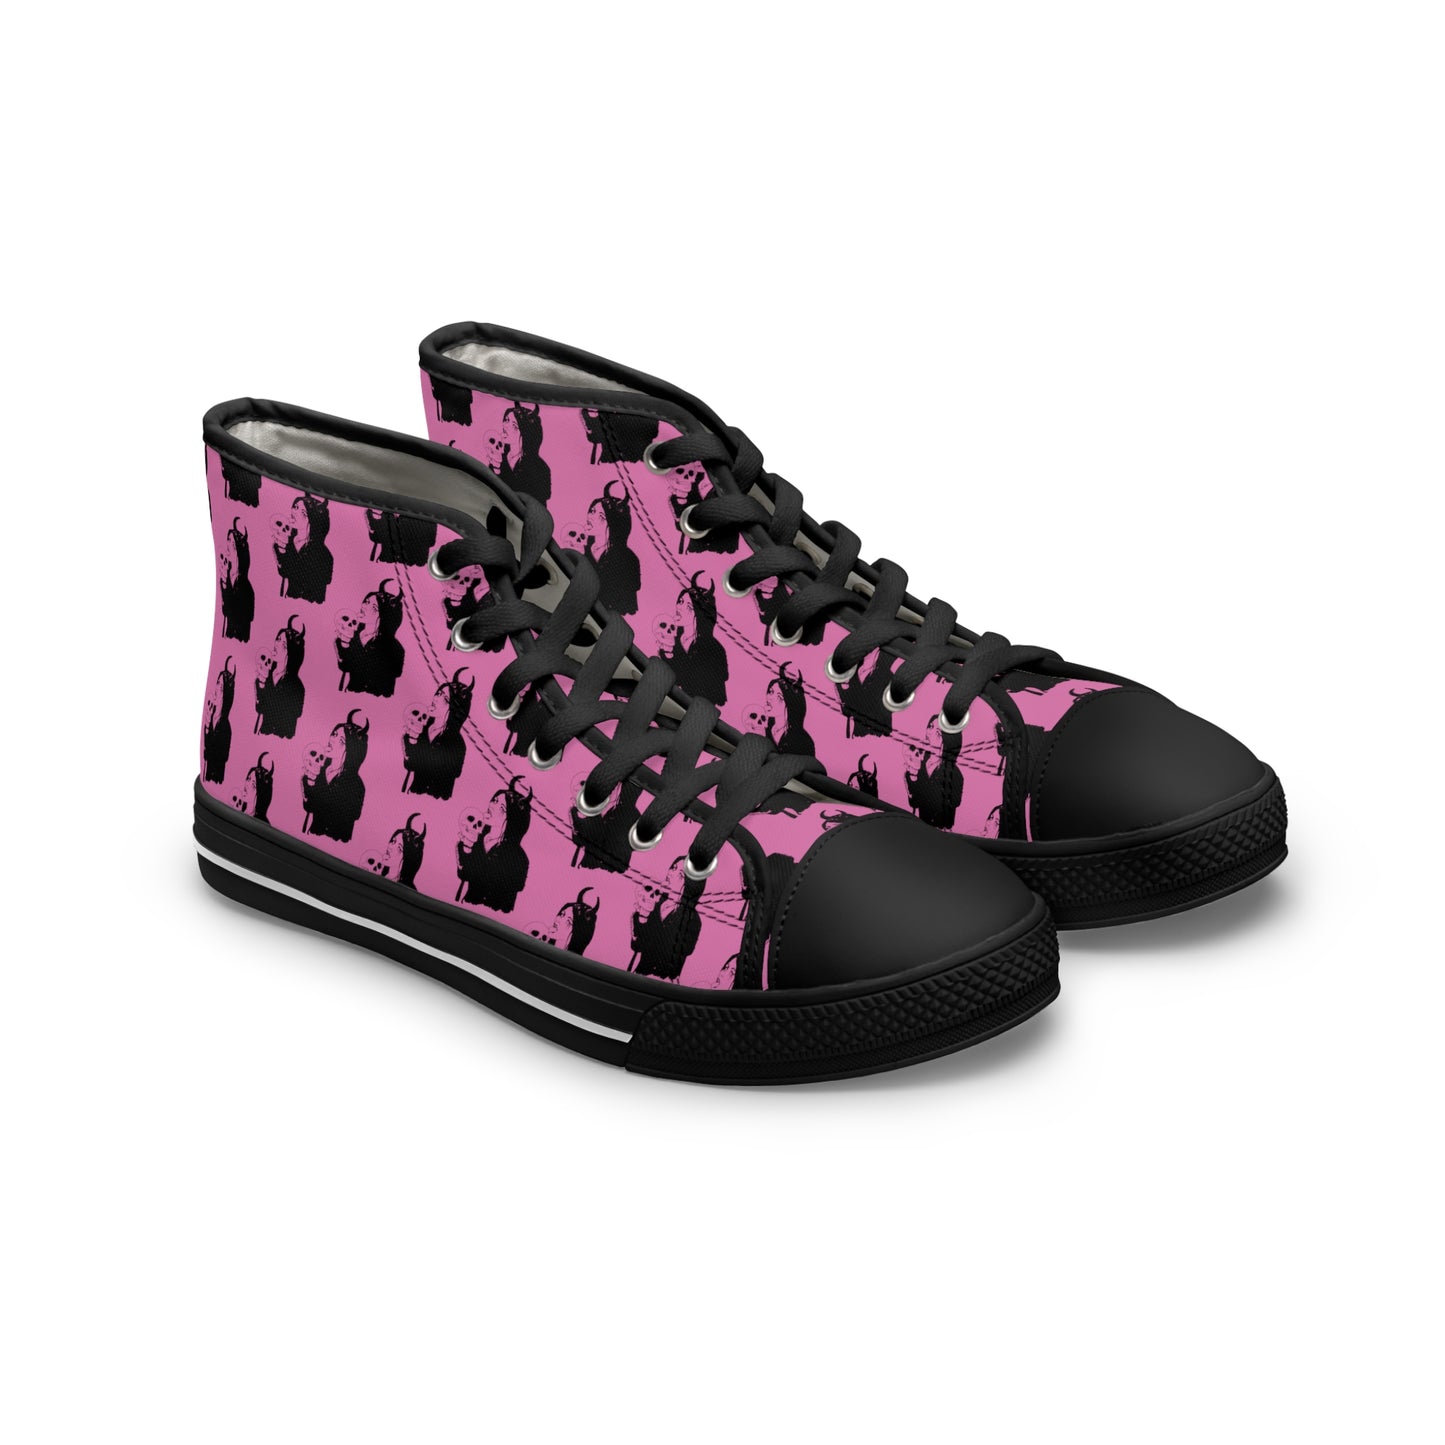 Pastel Goth Sneakers For Women With Skull Licking Gothic Woman Print adn Black Sole